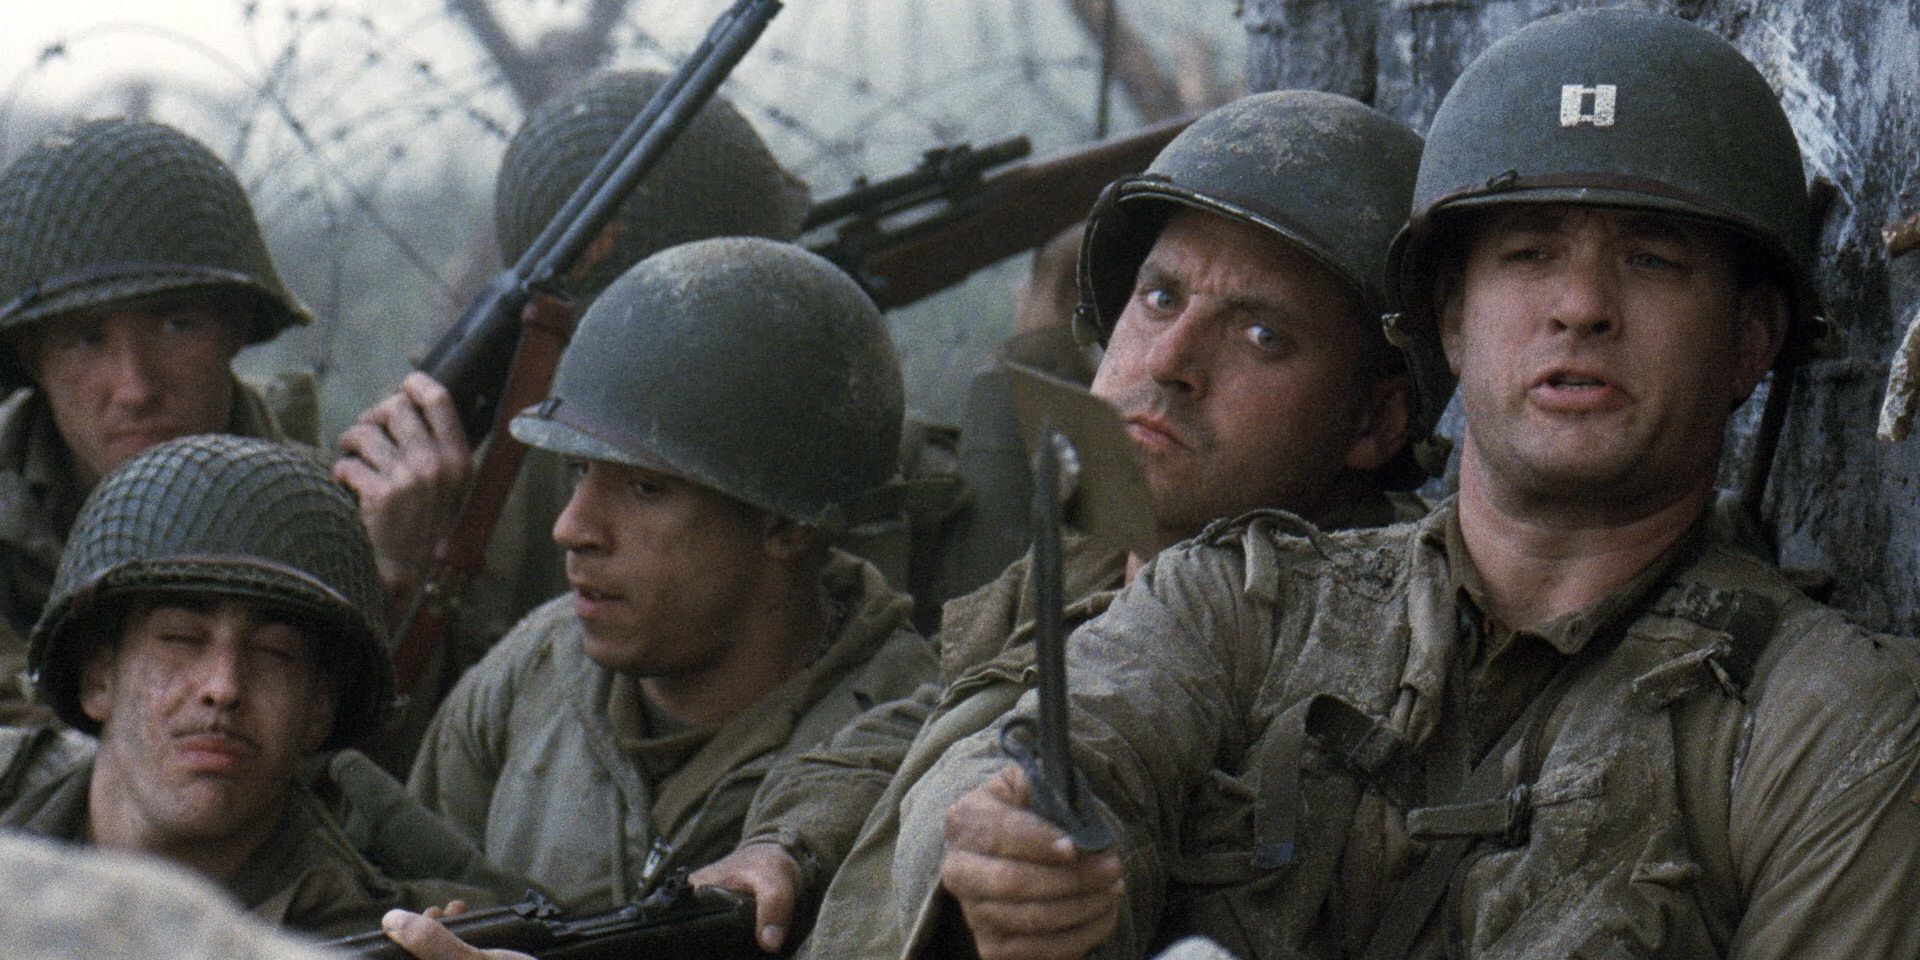 The opening D-Day scene in Saving Private Ryan